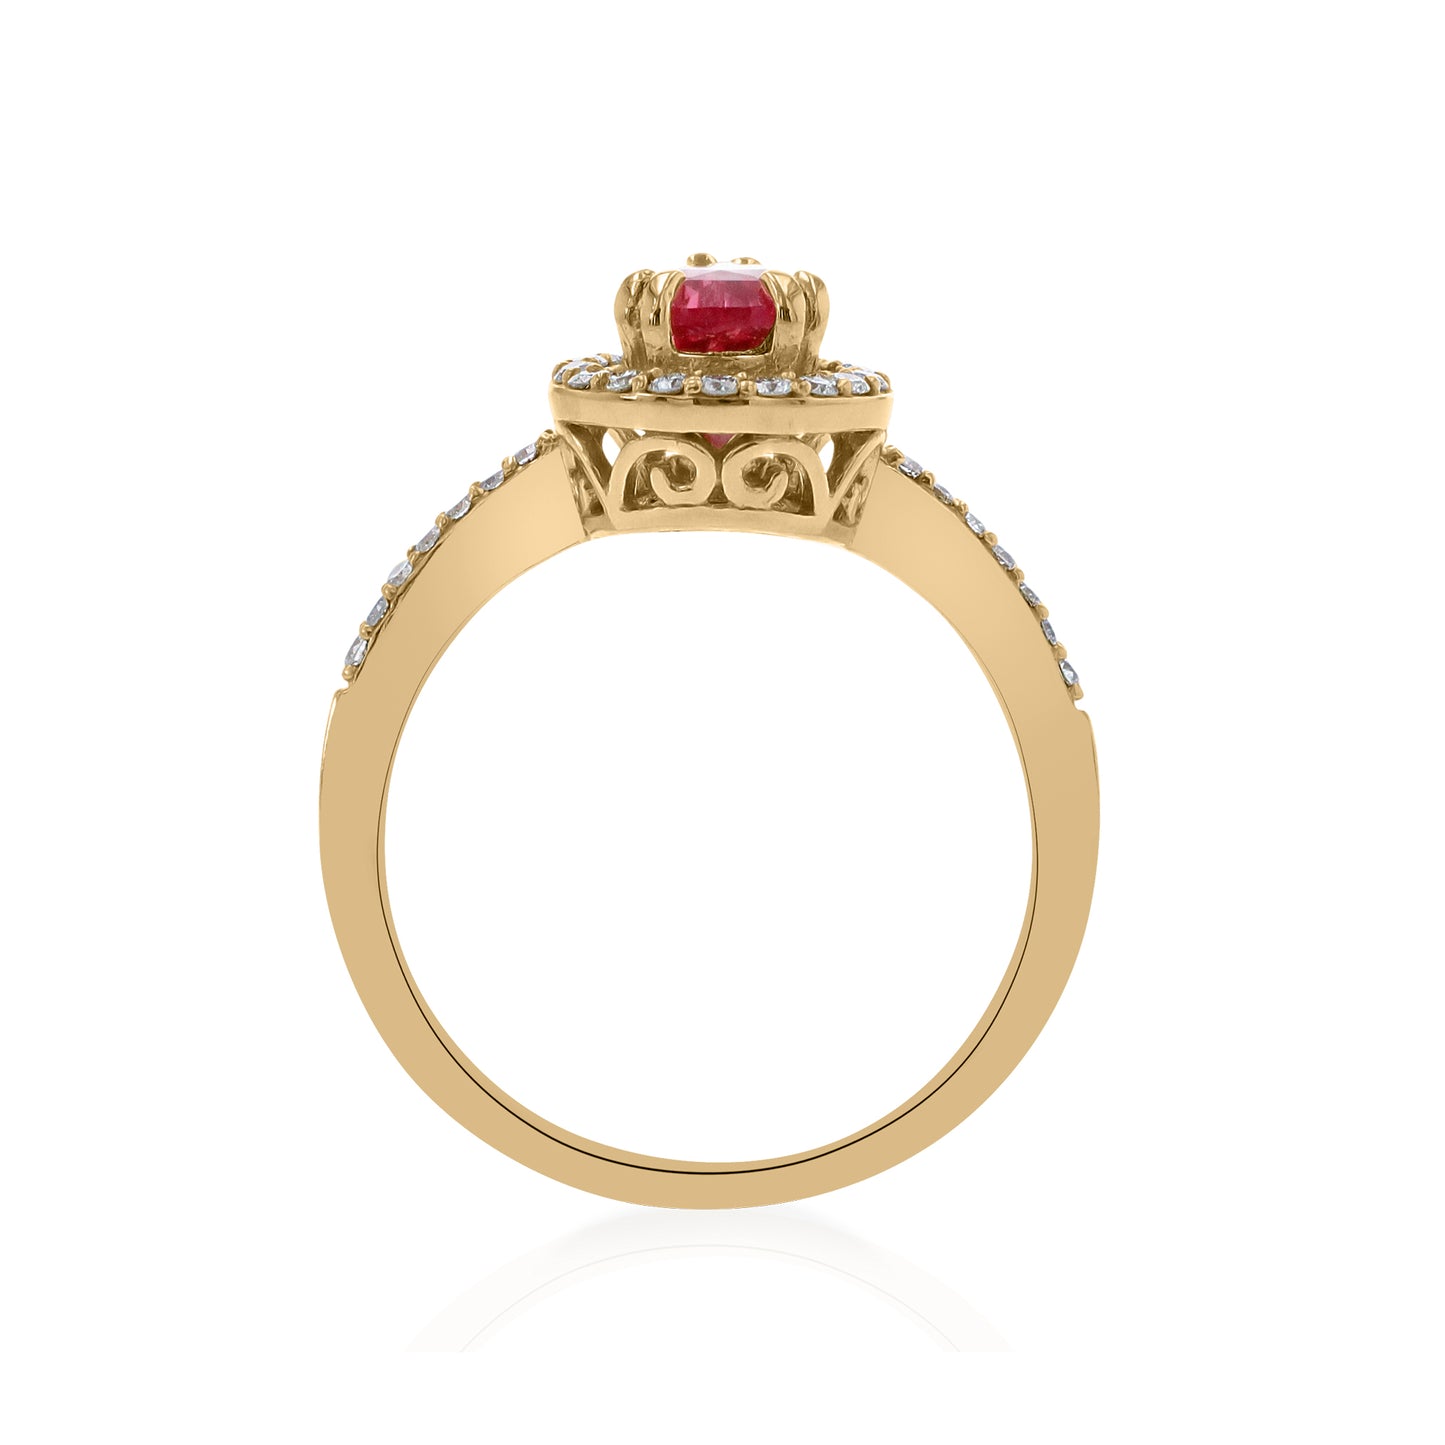 Natural Tanzanian Red Spinel 1.34 Carats set in 18K Gold